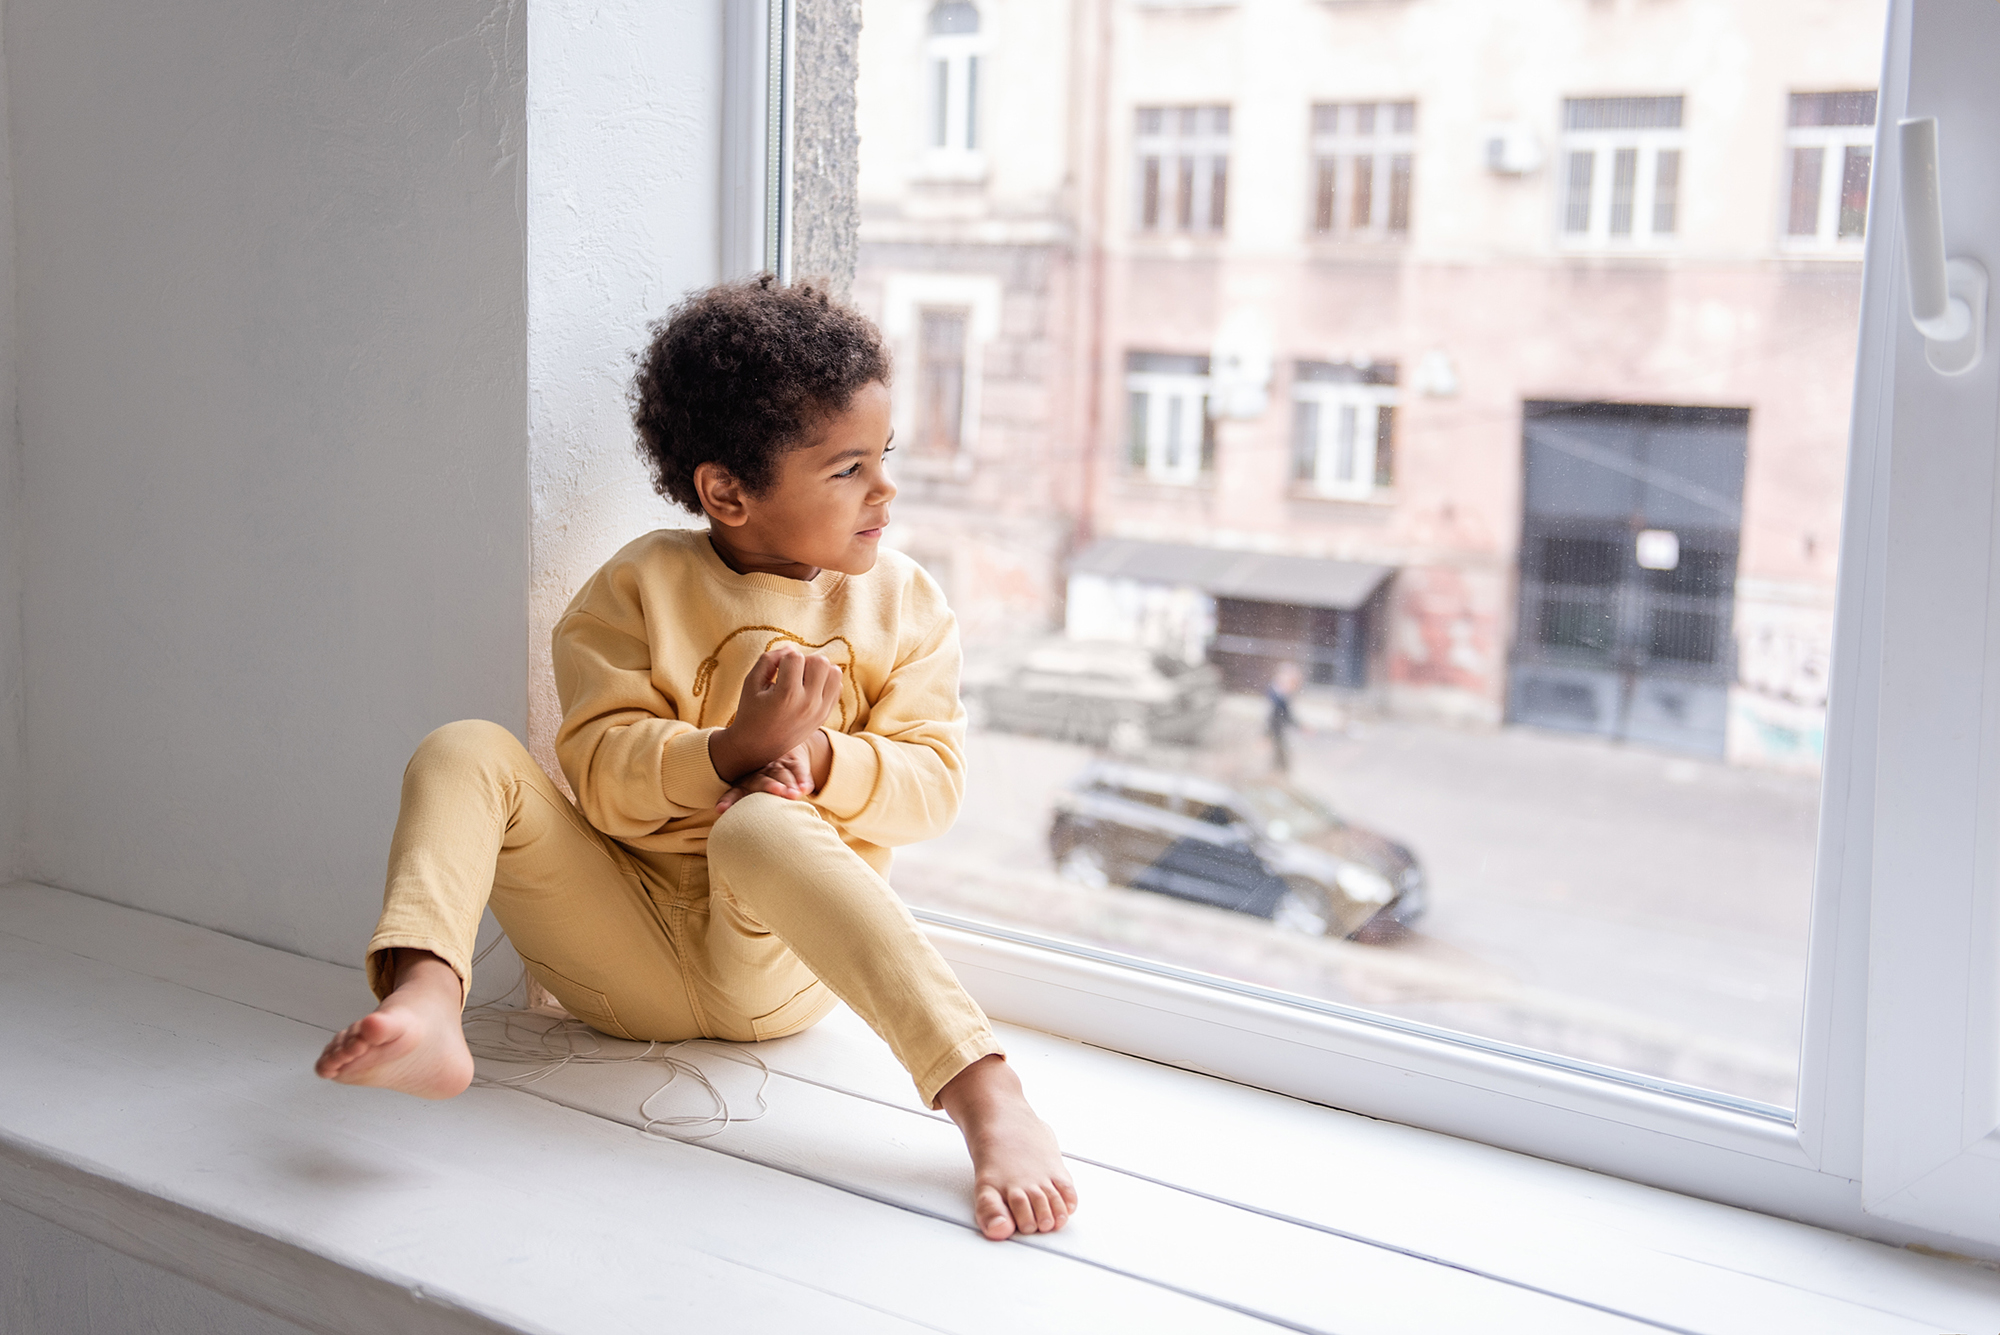 Young child looking out the window of an apartment building.